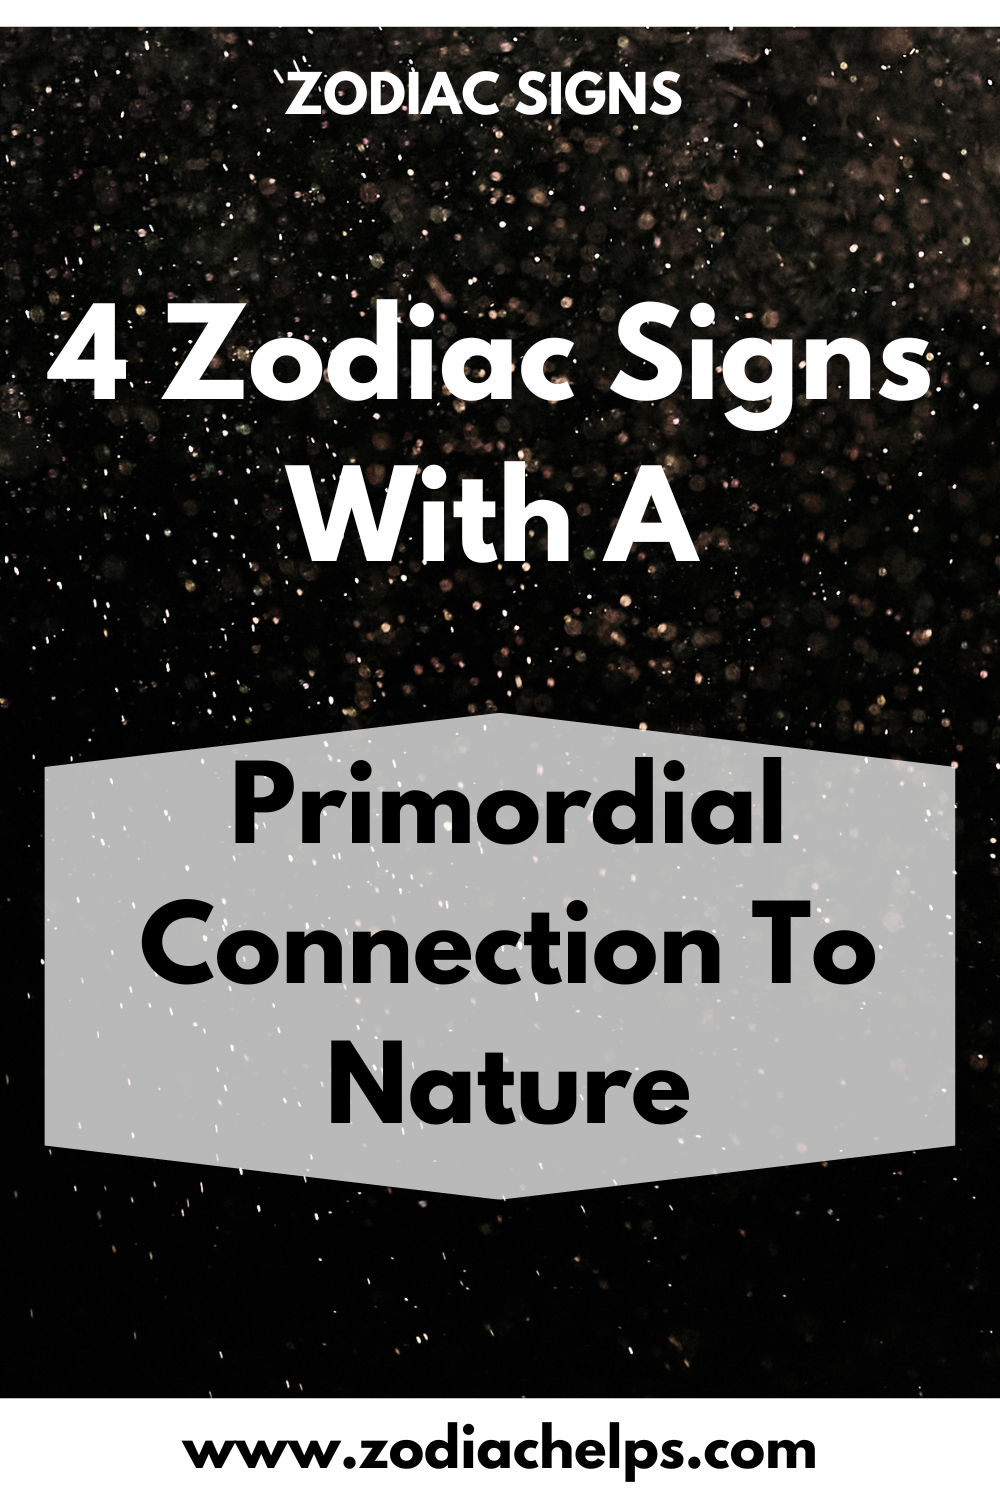 4 Zodiac Signs With A Primordial Connection To Nature